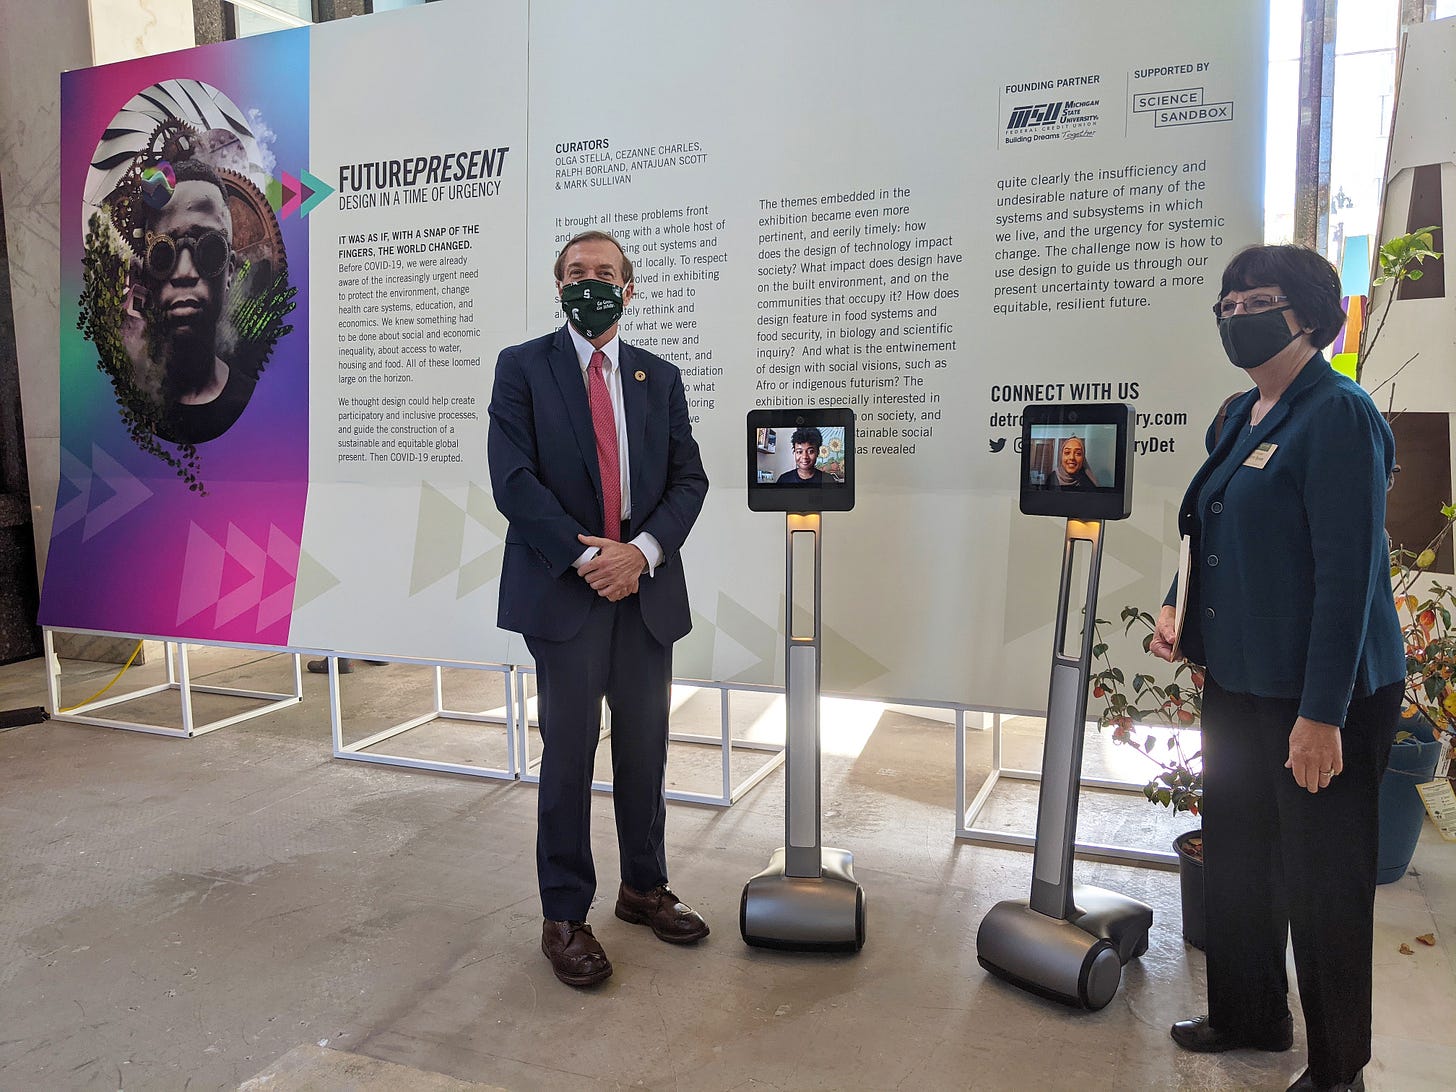 The president and board chair of Michigan State University pose with two telepresence robots in the Future Present exhibition.